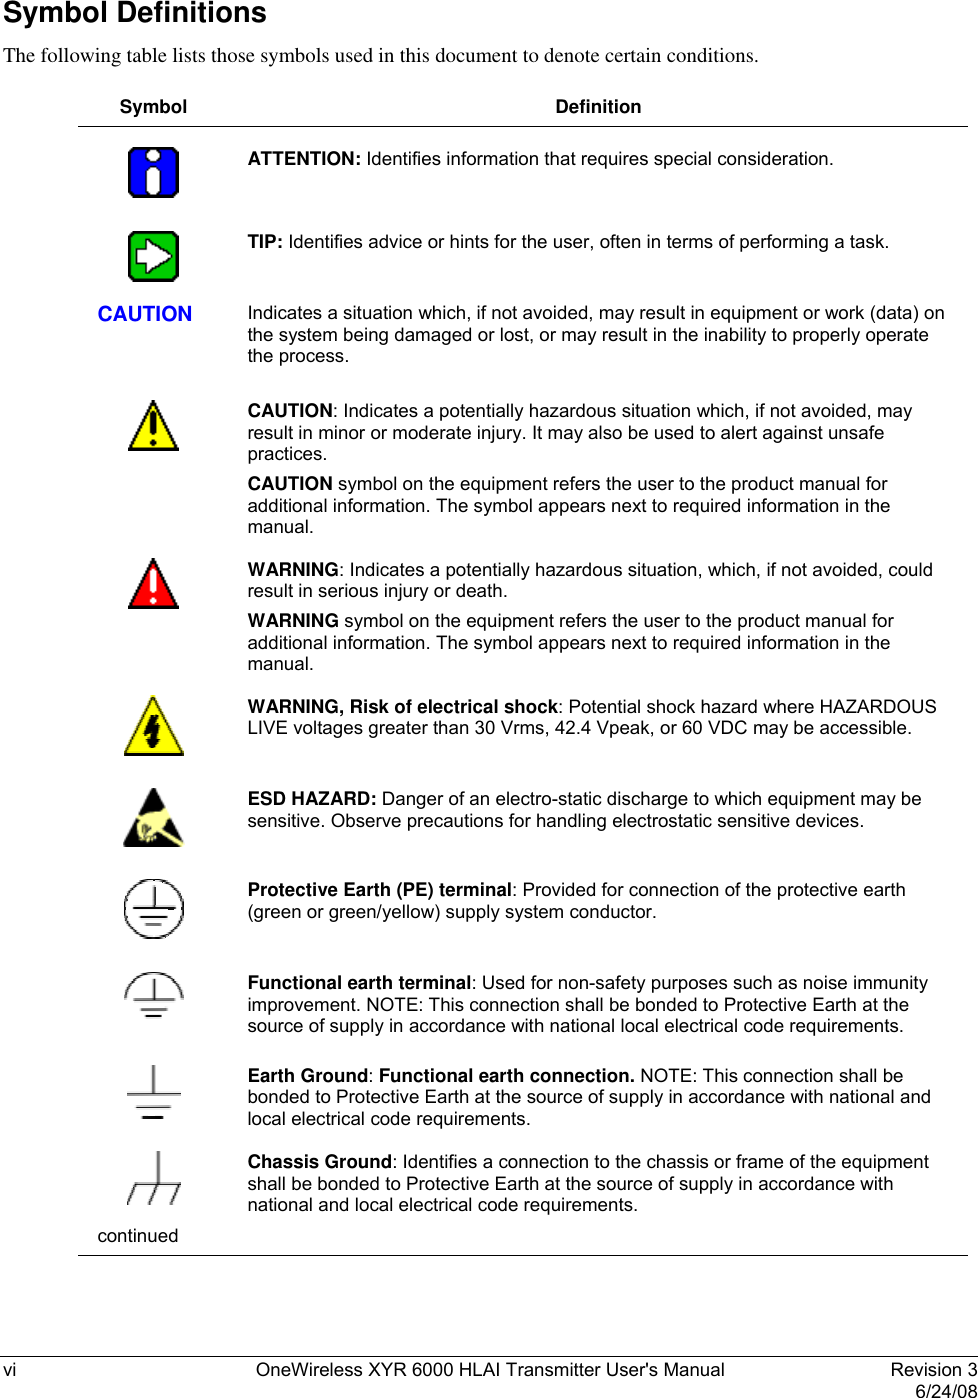  vi  OneWireless XYR 6000 HLAI Transmitter User&apos;s Manual   Revision 3   6/24/08 Symbol Definitions The following table lists those symbols used in this document to denote certain conditions.  Symbol Definition     ATTENTION: Identifies information that requires special consideration.     TIP: Identifies advice or hints for the user, often in terms of performing a task.   CAUTION  Indicates a situation which, if not avoided, may result in equipment or work (data) on the system being damaged or lost, or may result in the inability to properly operate the process.      CAUTION: Indicates a potentially hazardous situation which, if not avoided, may result in minor or moderate injury. It may also be used to alert against unsafe practices.  CAUTION symbol on the equipment refers the user to the product manual for additional information. The symbol appears next to required information in the manual.     WARNING: Indicates a potentially hazardous situation, which, if not avoided, could result in serious injury or death. WARNING symbol on the equipment refers the user to the product manual for additional information. The symbol appears next to required information in the manual.     WARNING, Risk of electrical shock: Potential shock hazard where HAZARDOUS LIVE voltages greater than 30 Vrms, 42.4 Vpeak, or 60 VDC may be accessible.     ESD HAZARD: Danger of an electro-static discharge to which equipment may be sensitive. Observe precautions for handling electrostatic sensitive devices.     Protective Earth (PE) terminal: Provided for connection of the protective earth (green or green/yellow) supply system conductor.     Functional earth terminal: Used for non-safety purposes such as noise immunity improvement. NOTE: This connection shall be bonded to Protective Earth at the source of supply in accordance with national local electrical code requirements.     Earth Ground: Functional earth connection. NOTE: This connection shall be bonded to Protective Earth at the source of supply in accordance with national and local electrical code requirements.     Chassis Ground: Identifies a connection to the chassis or frame of the equipment shall be bonded to Protective Earth at the source of supply in accordance with national and local electrical code requirements. continued    